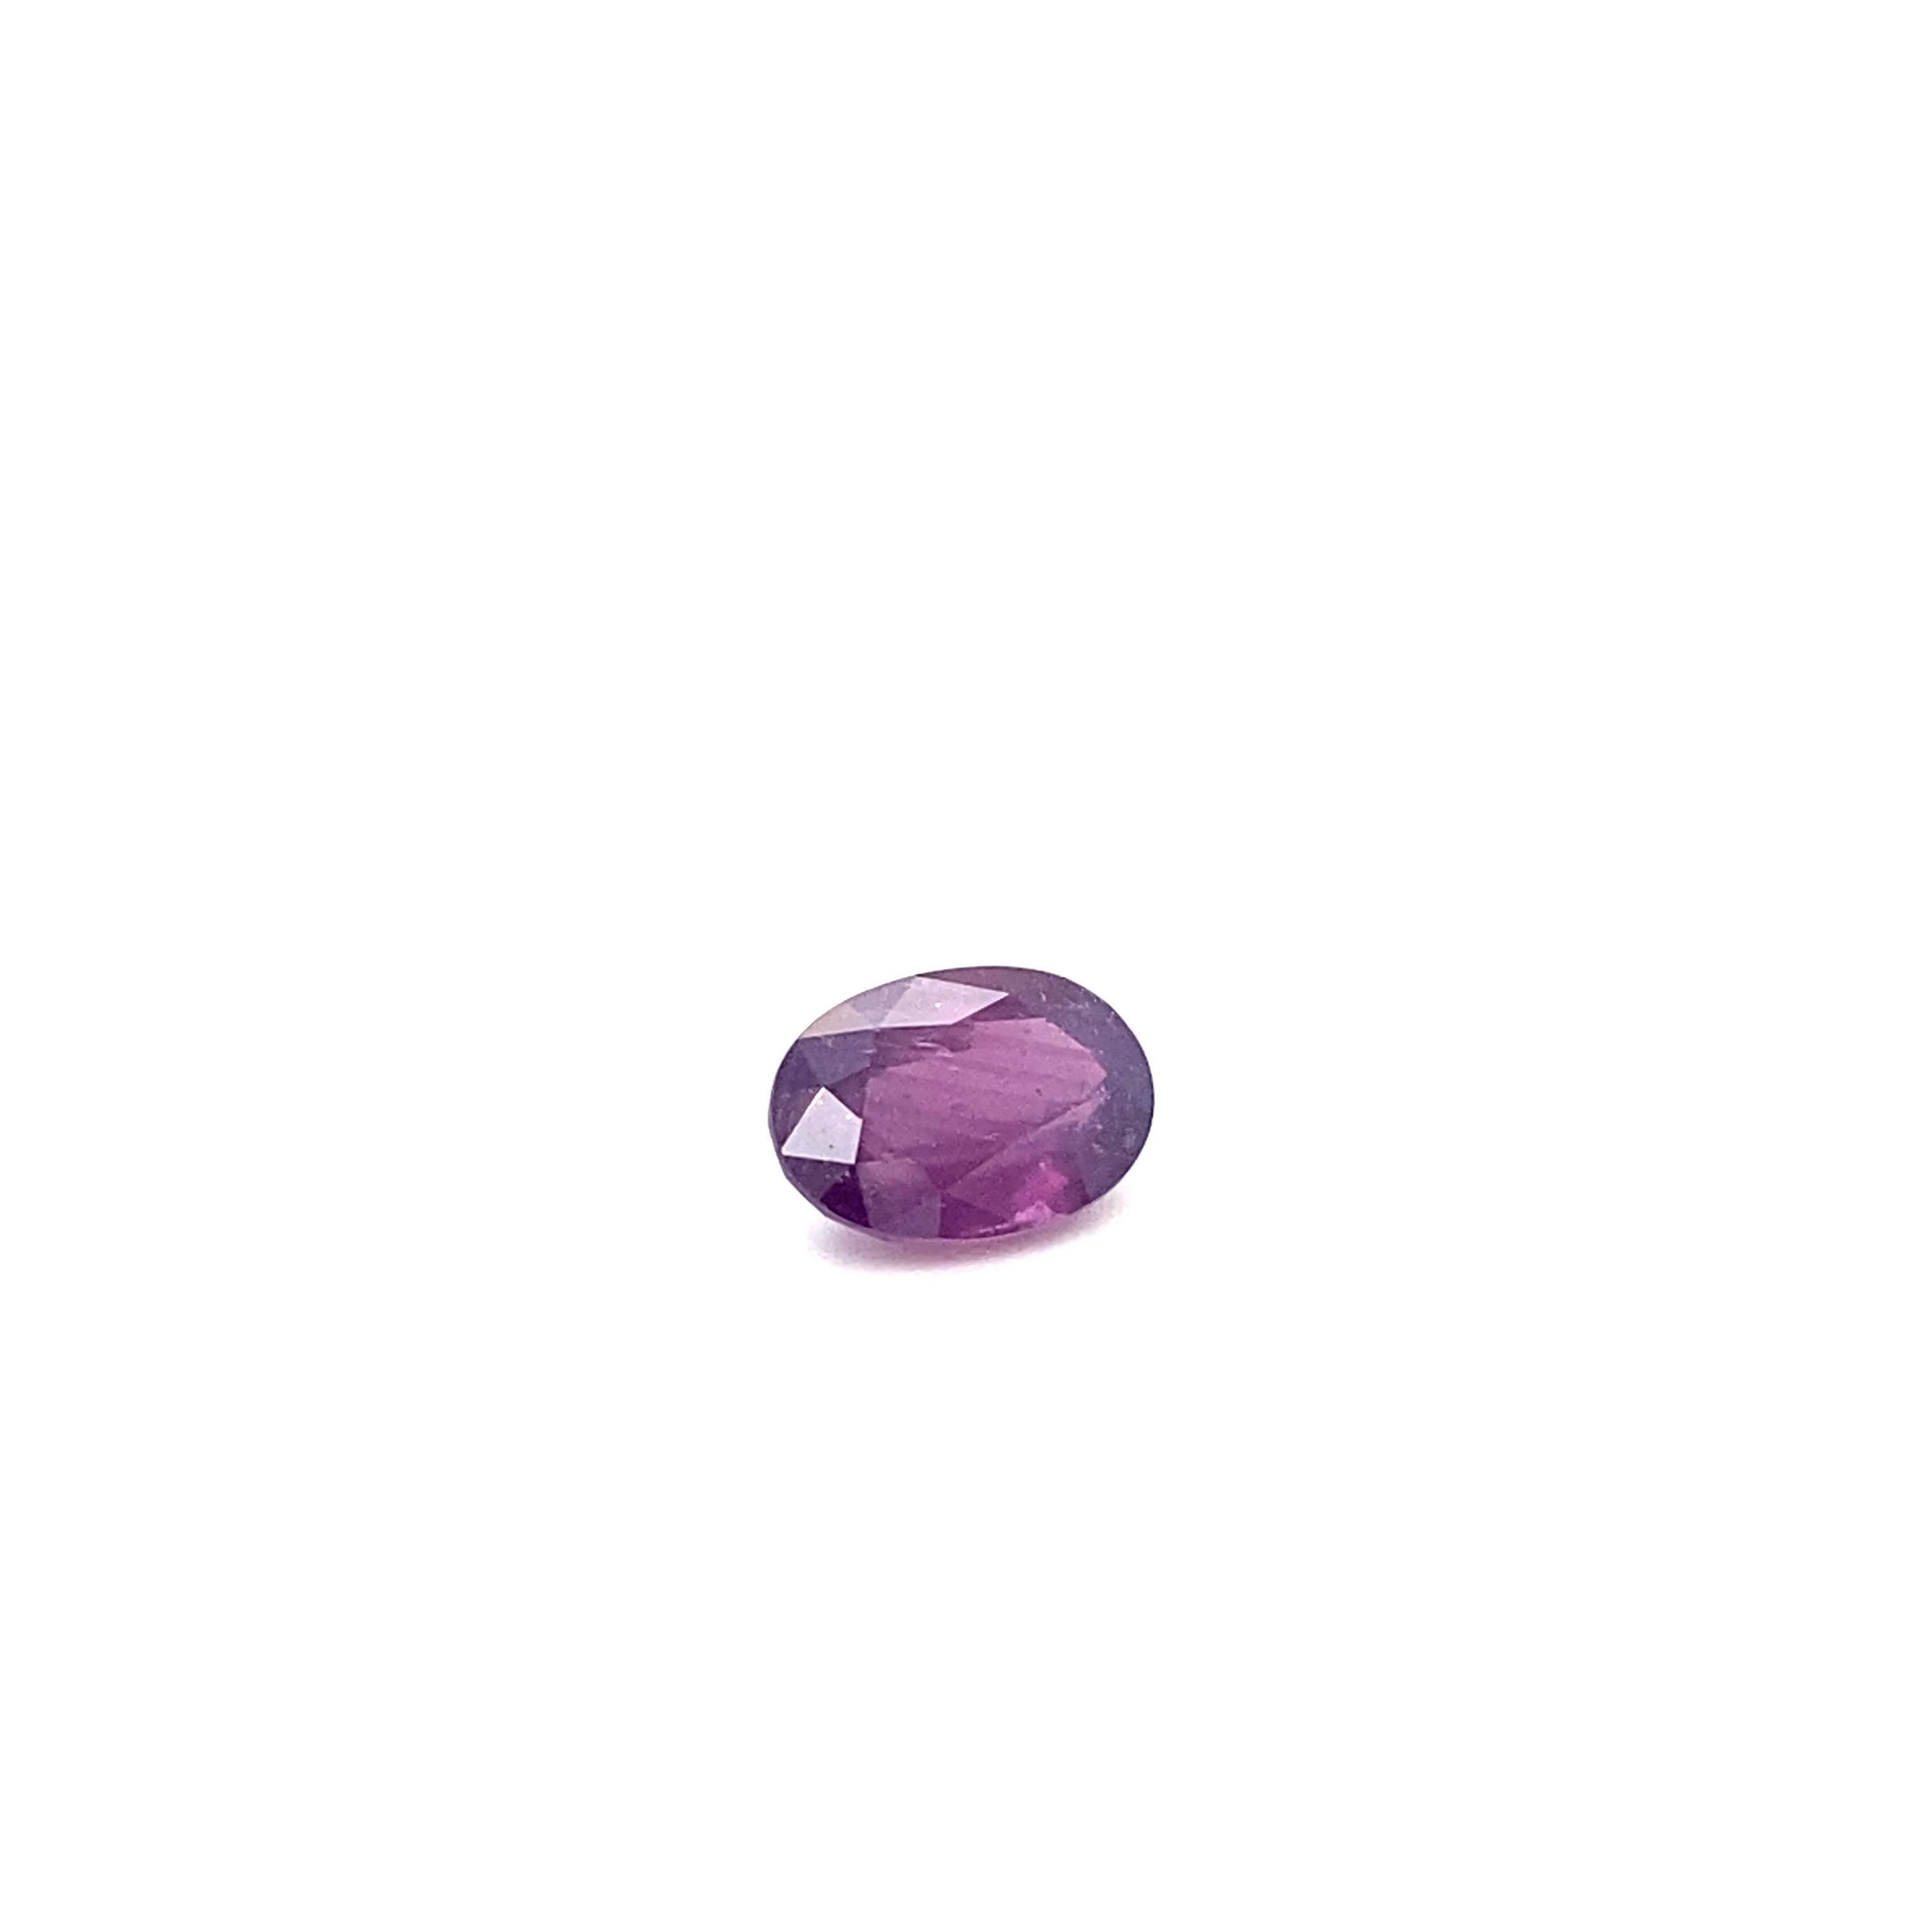 Oval Cut GIA Certified 5.94 Carat Oval Shape Natural Pink Purple Sapphire Loose Gemstone For Sale